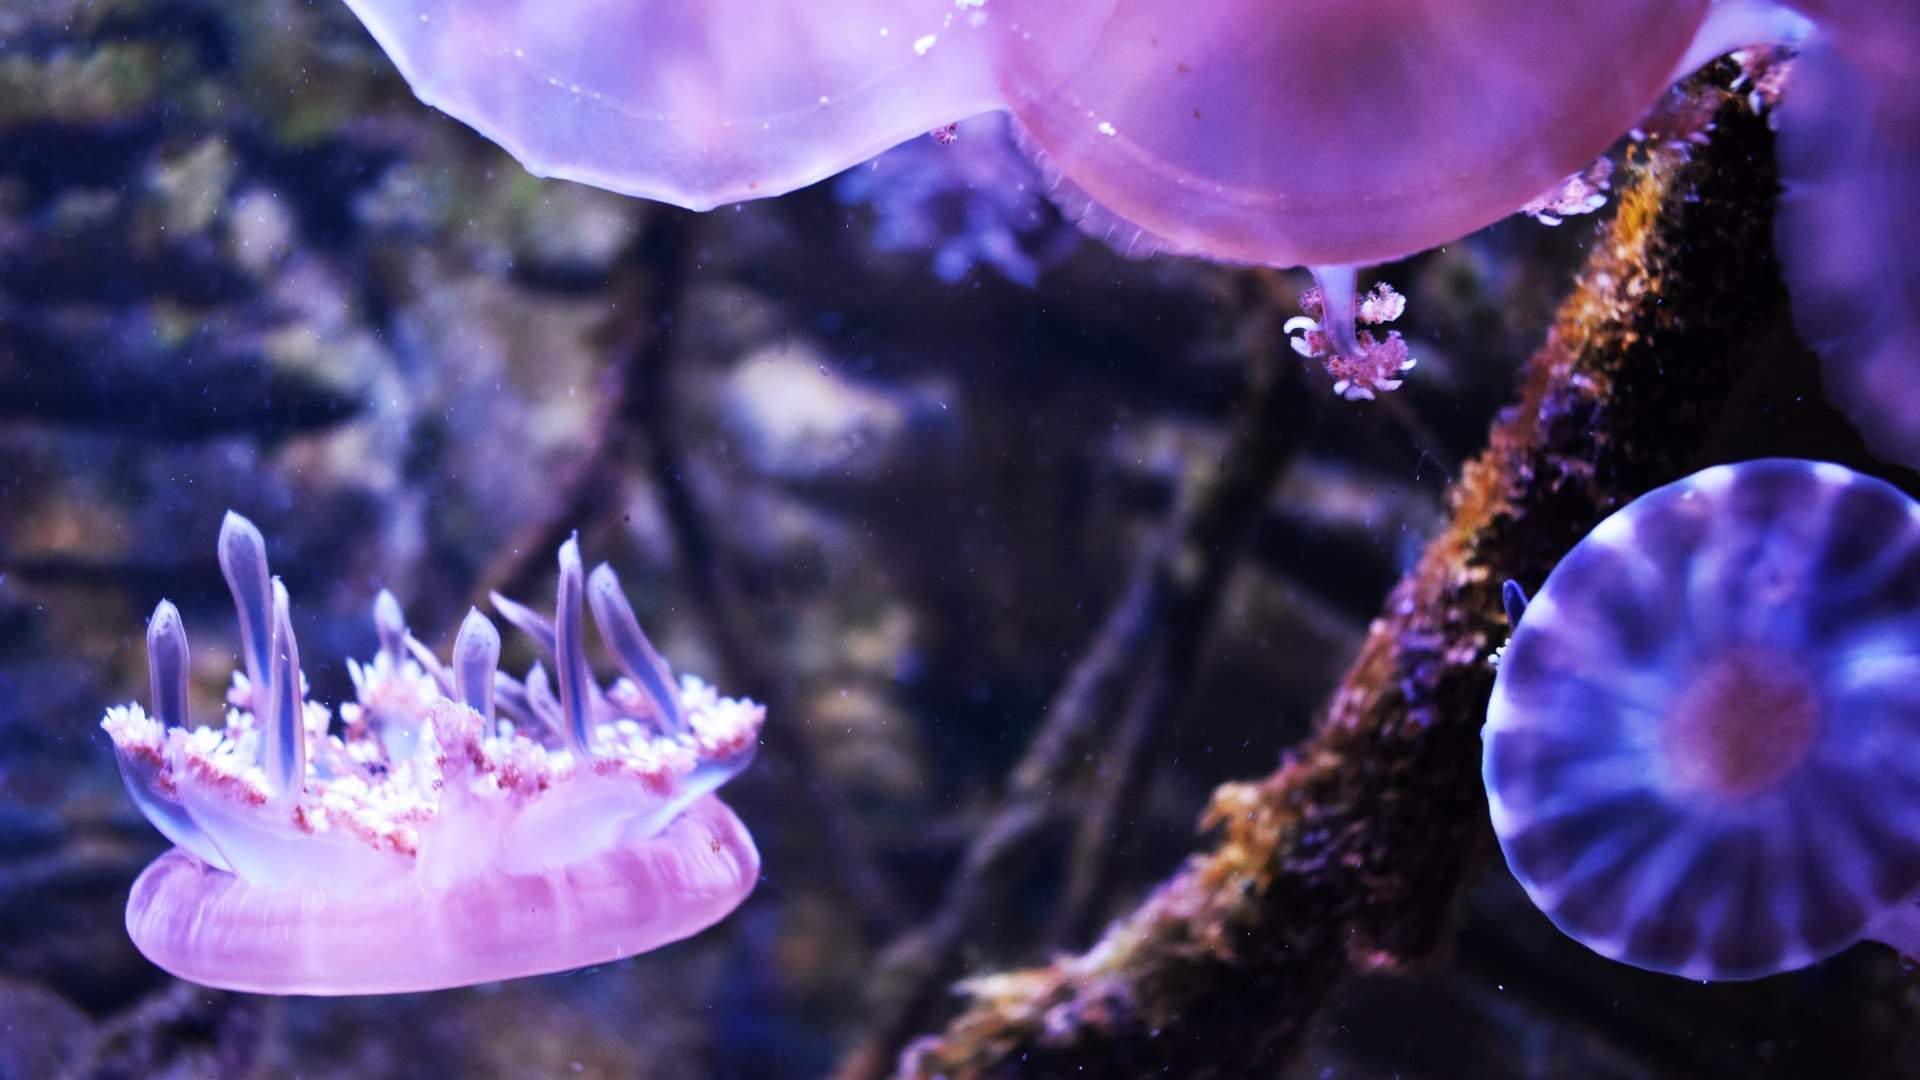 Ocean Invaders Is the Interactive and Luminous New Jellyfish Exhibition Floating Into Melbourne Aquarium